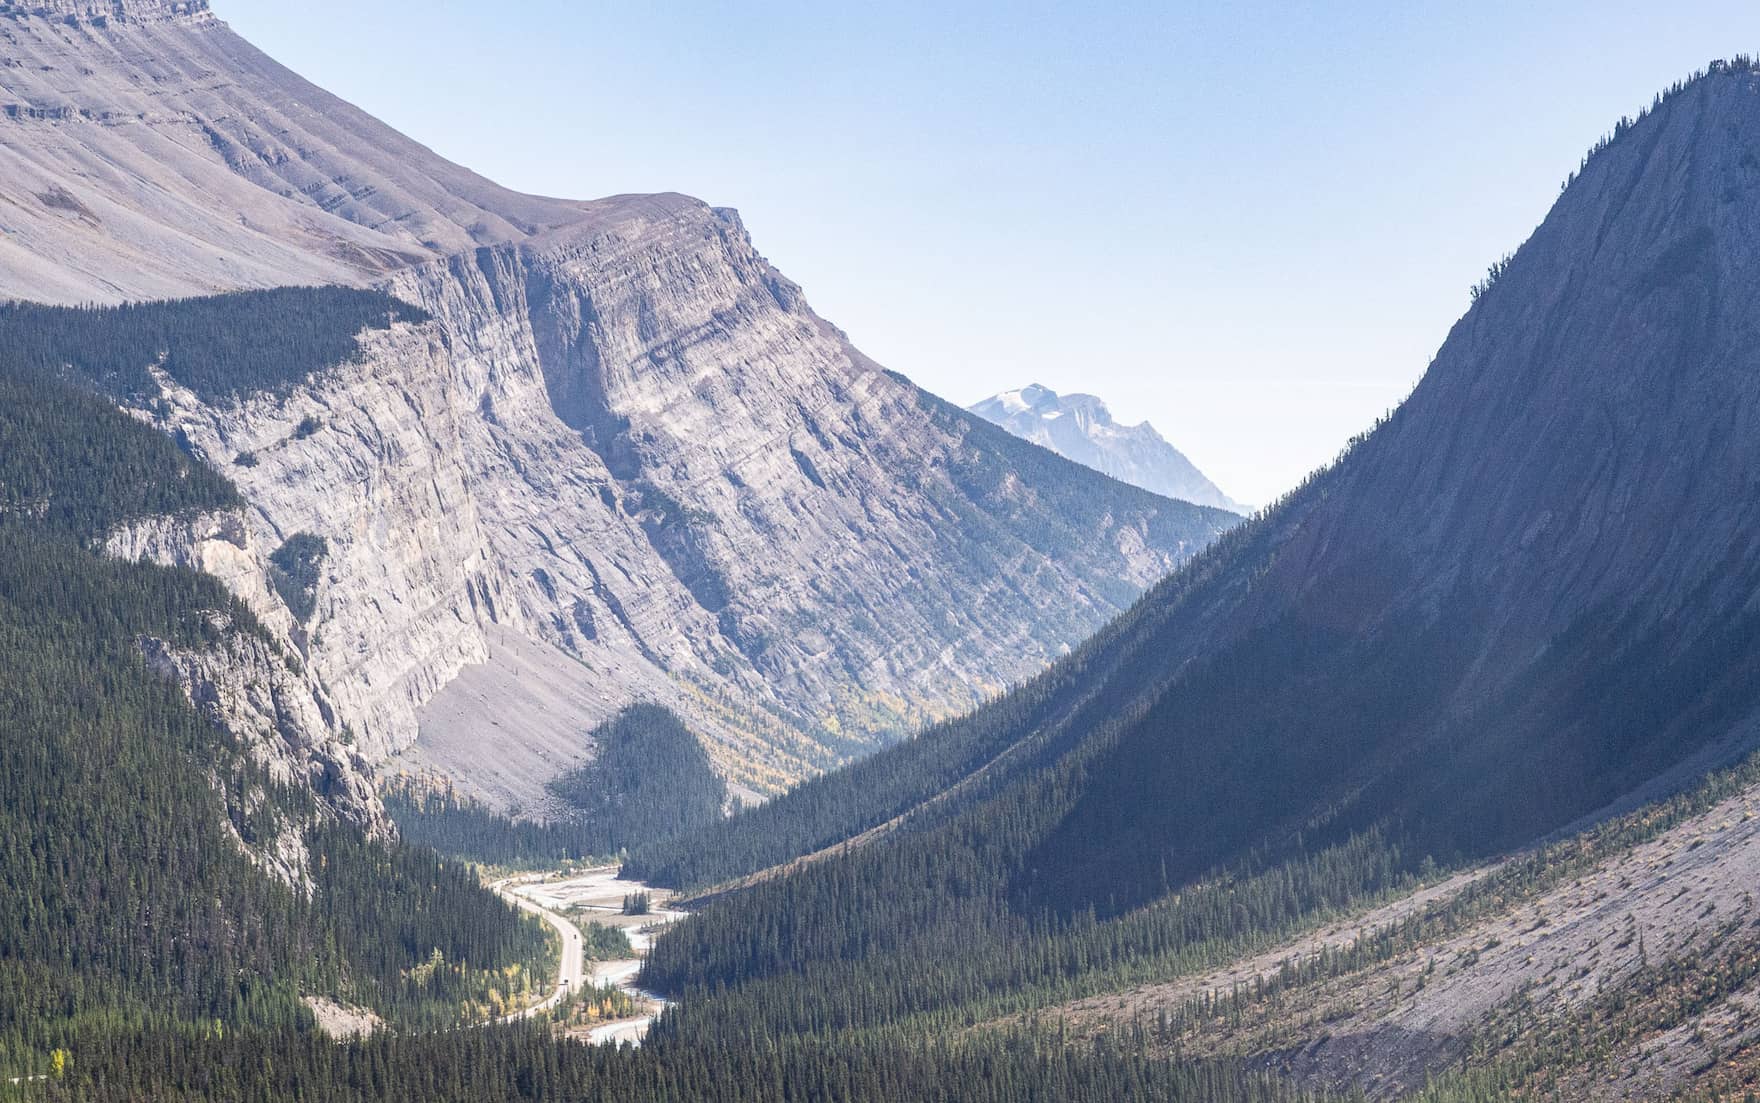 A deep valley in which a river flows. The Icefields Parkway follows the river.